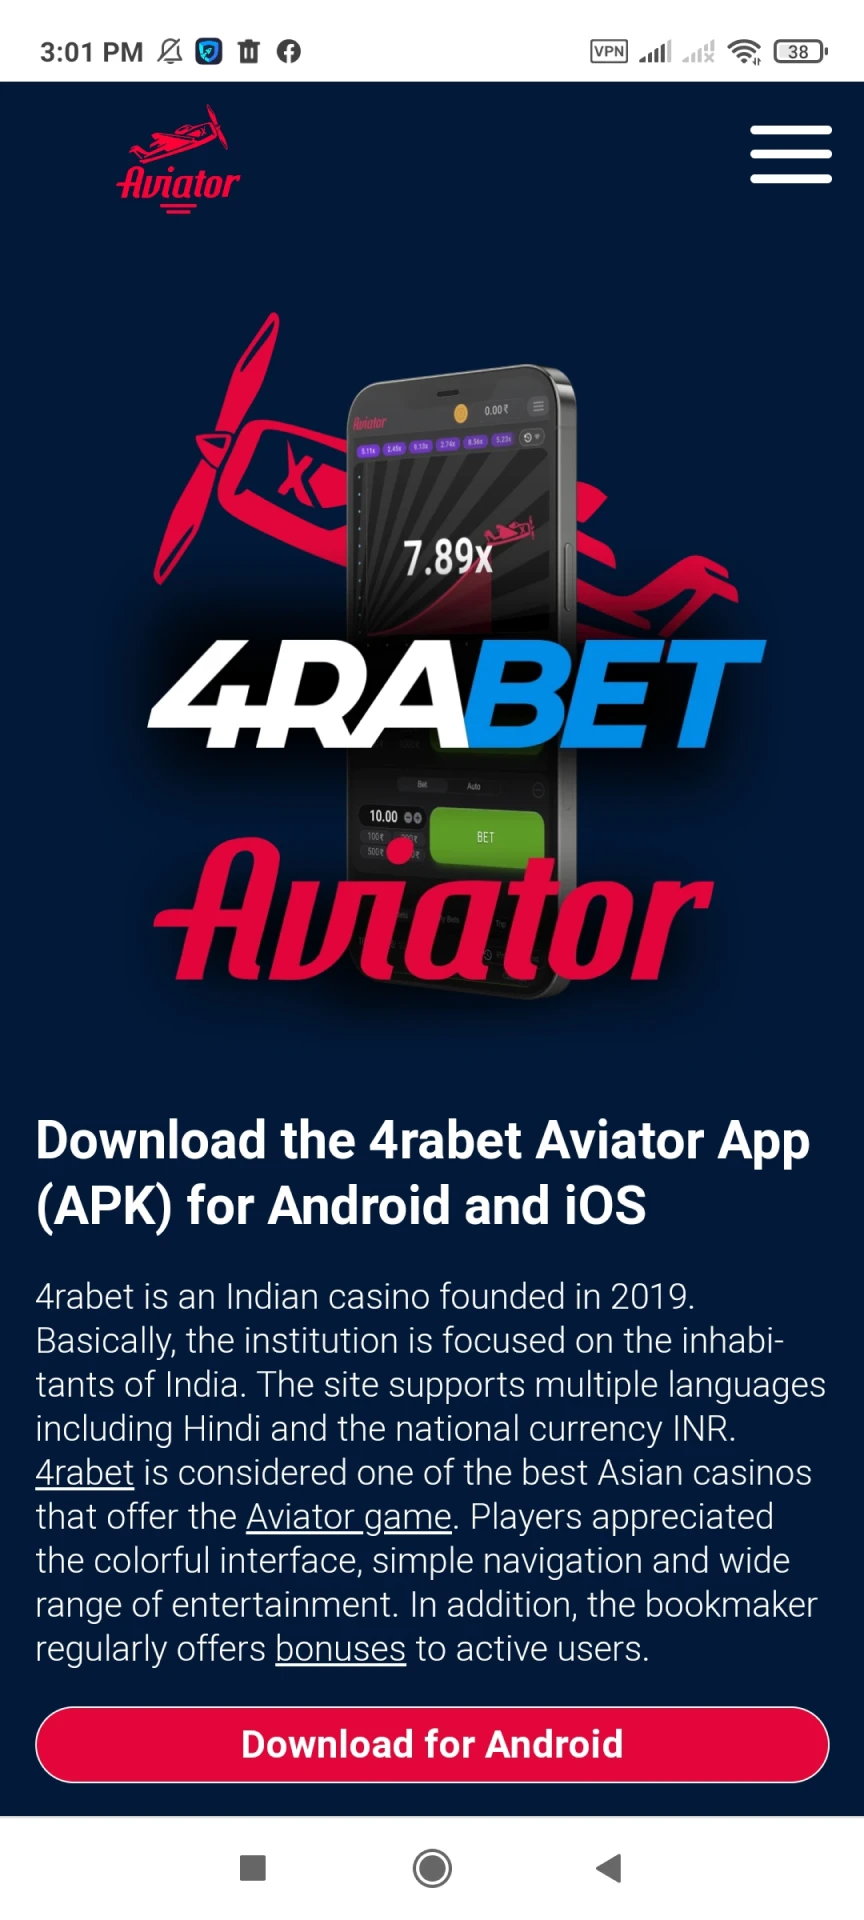 Go to 4rabet to download the application for Android.